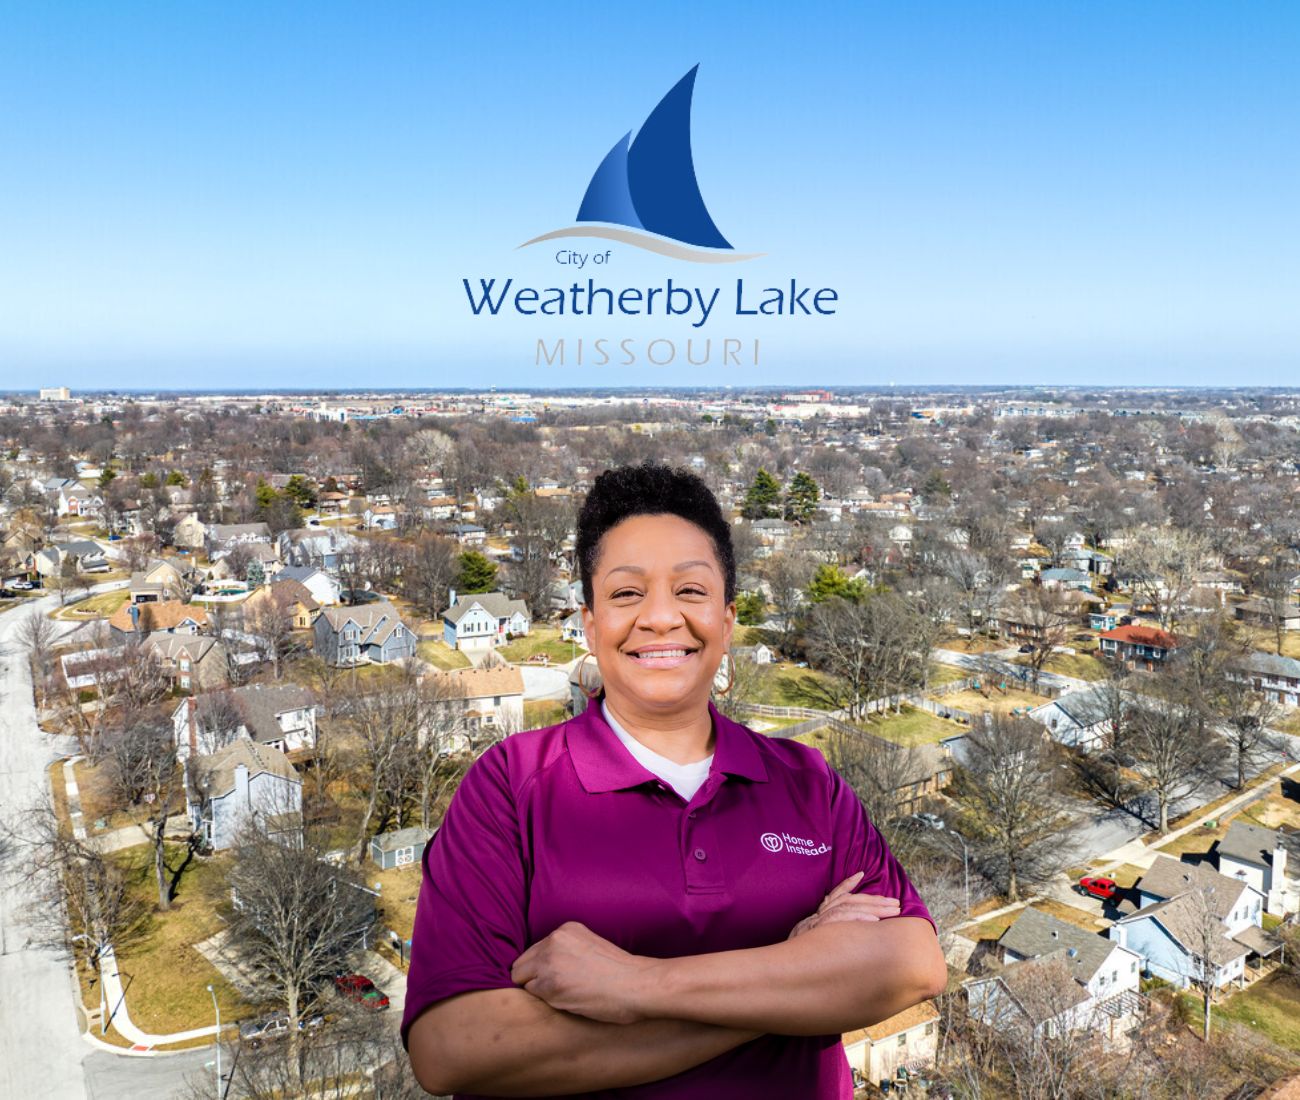 Home Instead caregiver with Weatherby Lake Missouri in the background